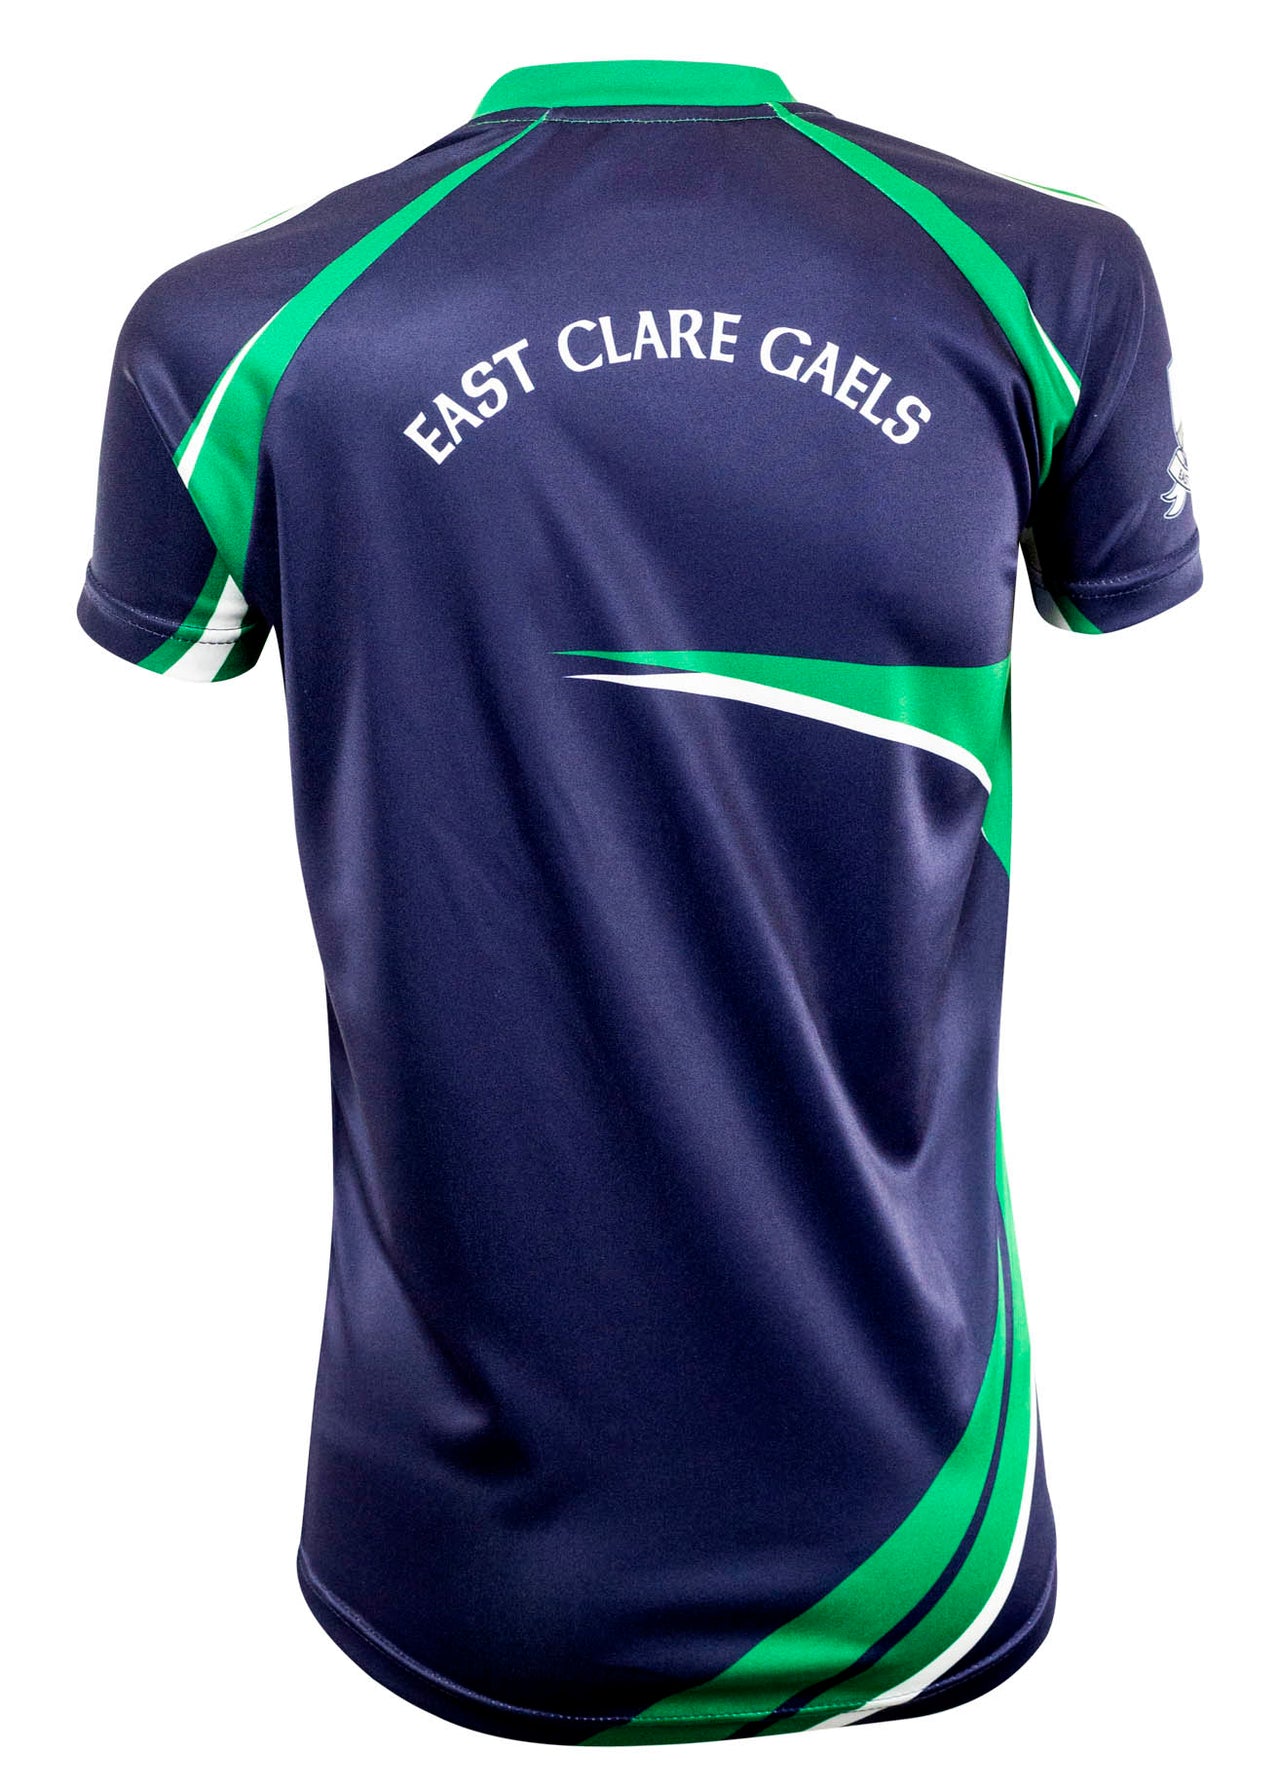 East Clare Gaels Home Jersey Player Fit Adult